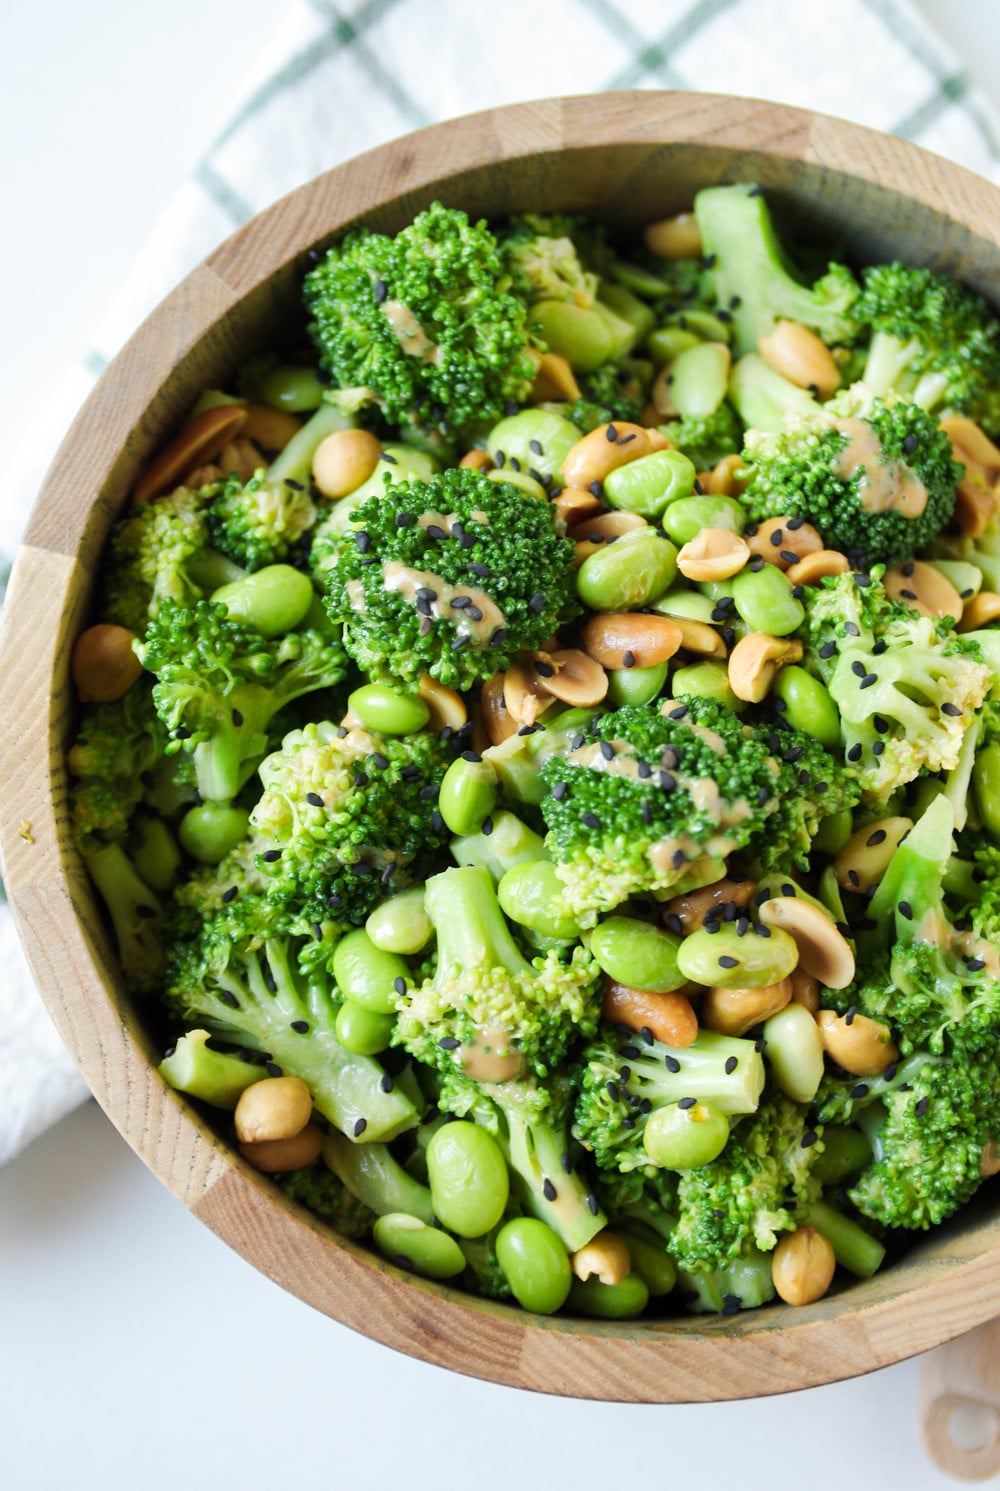 Fresh bright broccoli, protein-packed edamame, crunchy peanuts, and just 15 minutes is all it takes to make this Broccoli Edamame Salad with Peanut Sauce. 